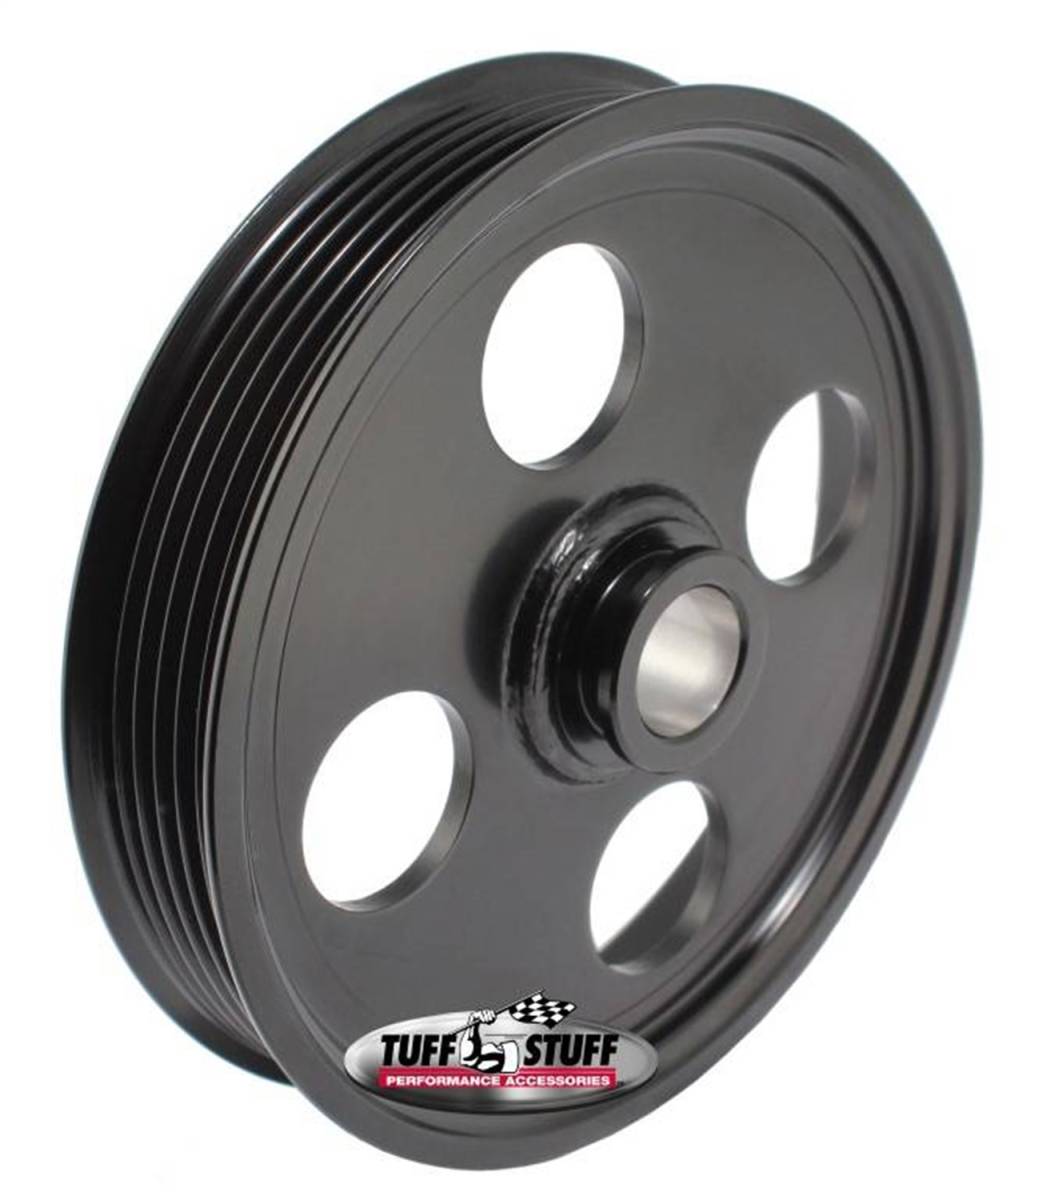 Tuff Stuff Performance - Type II Power Steering Pump Pulley For .748 in. Shaft 6-Groove Fits All Tuff Stuff Type II Pumps That Require A 19mm Press-On Pulley Black Powder Coated 8489B